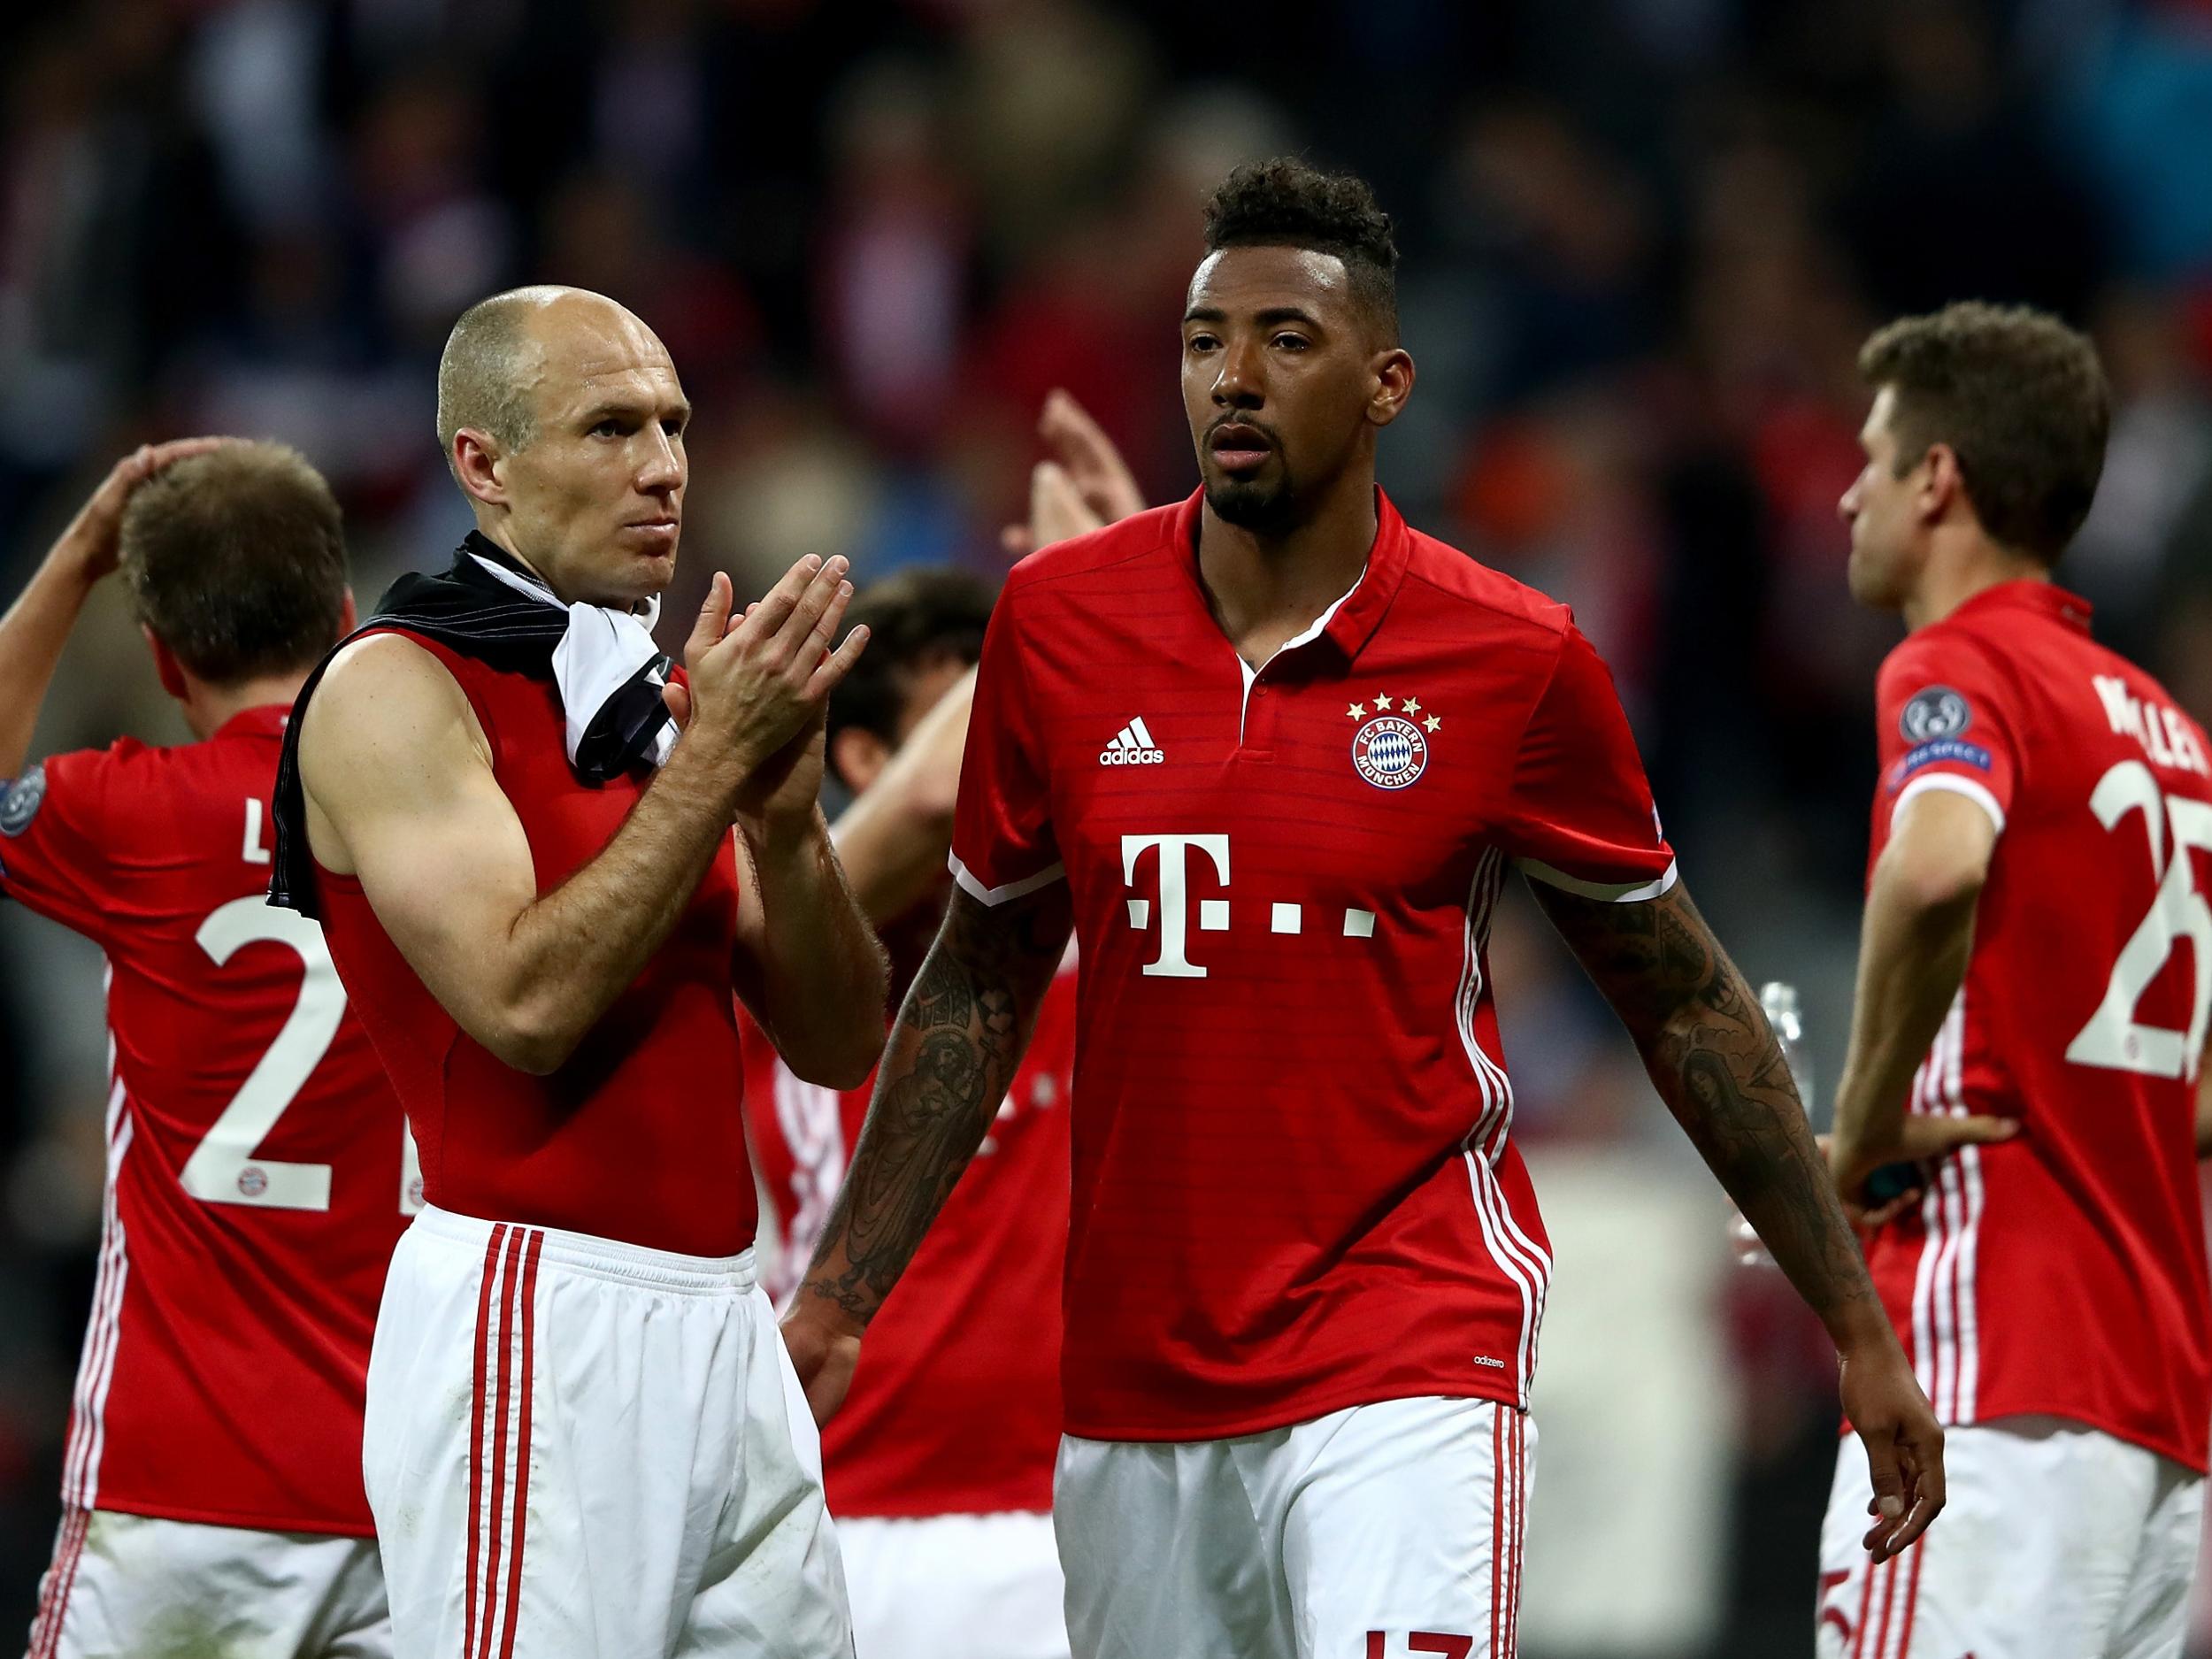 Bayern's players were crestfallen at the final whistle